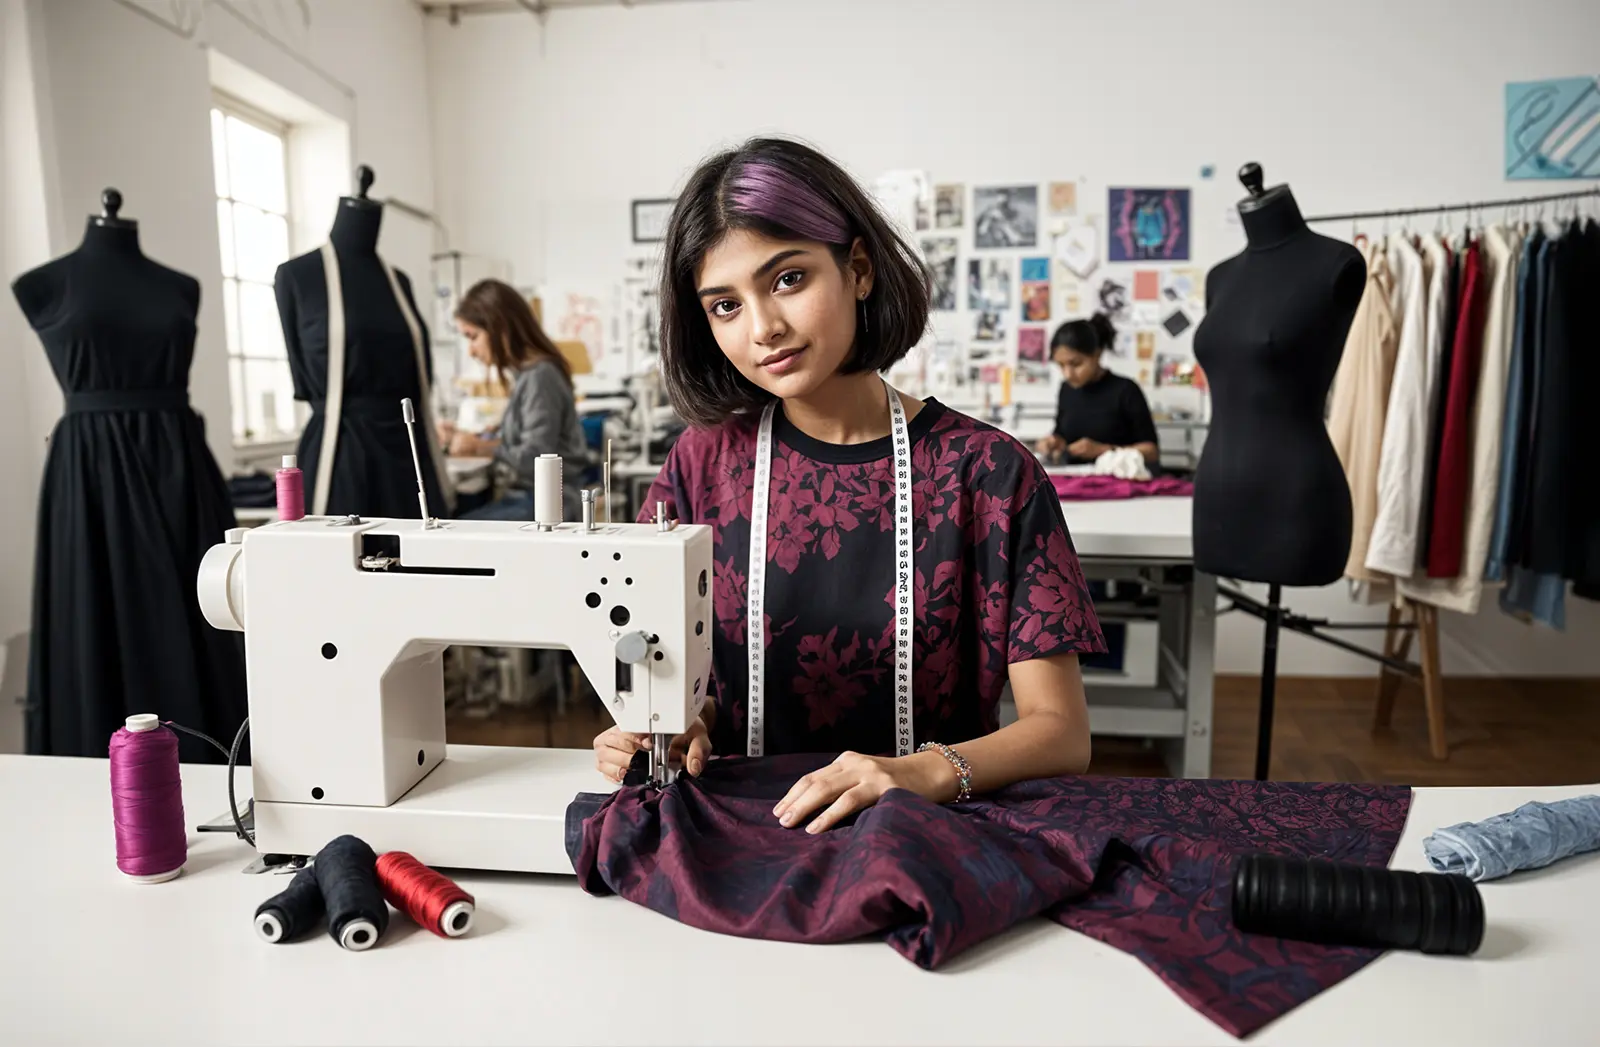 Advanced Diploma in Fashion Design 3 Years (JD Institute)